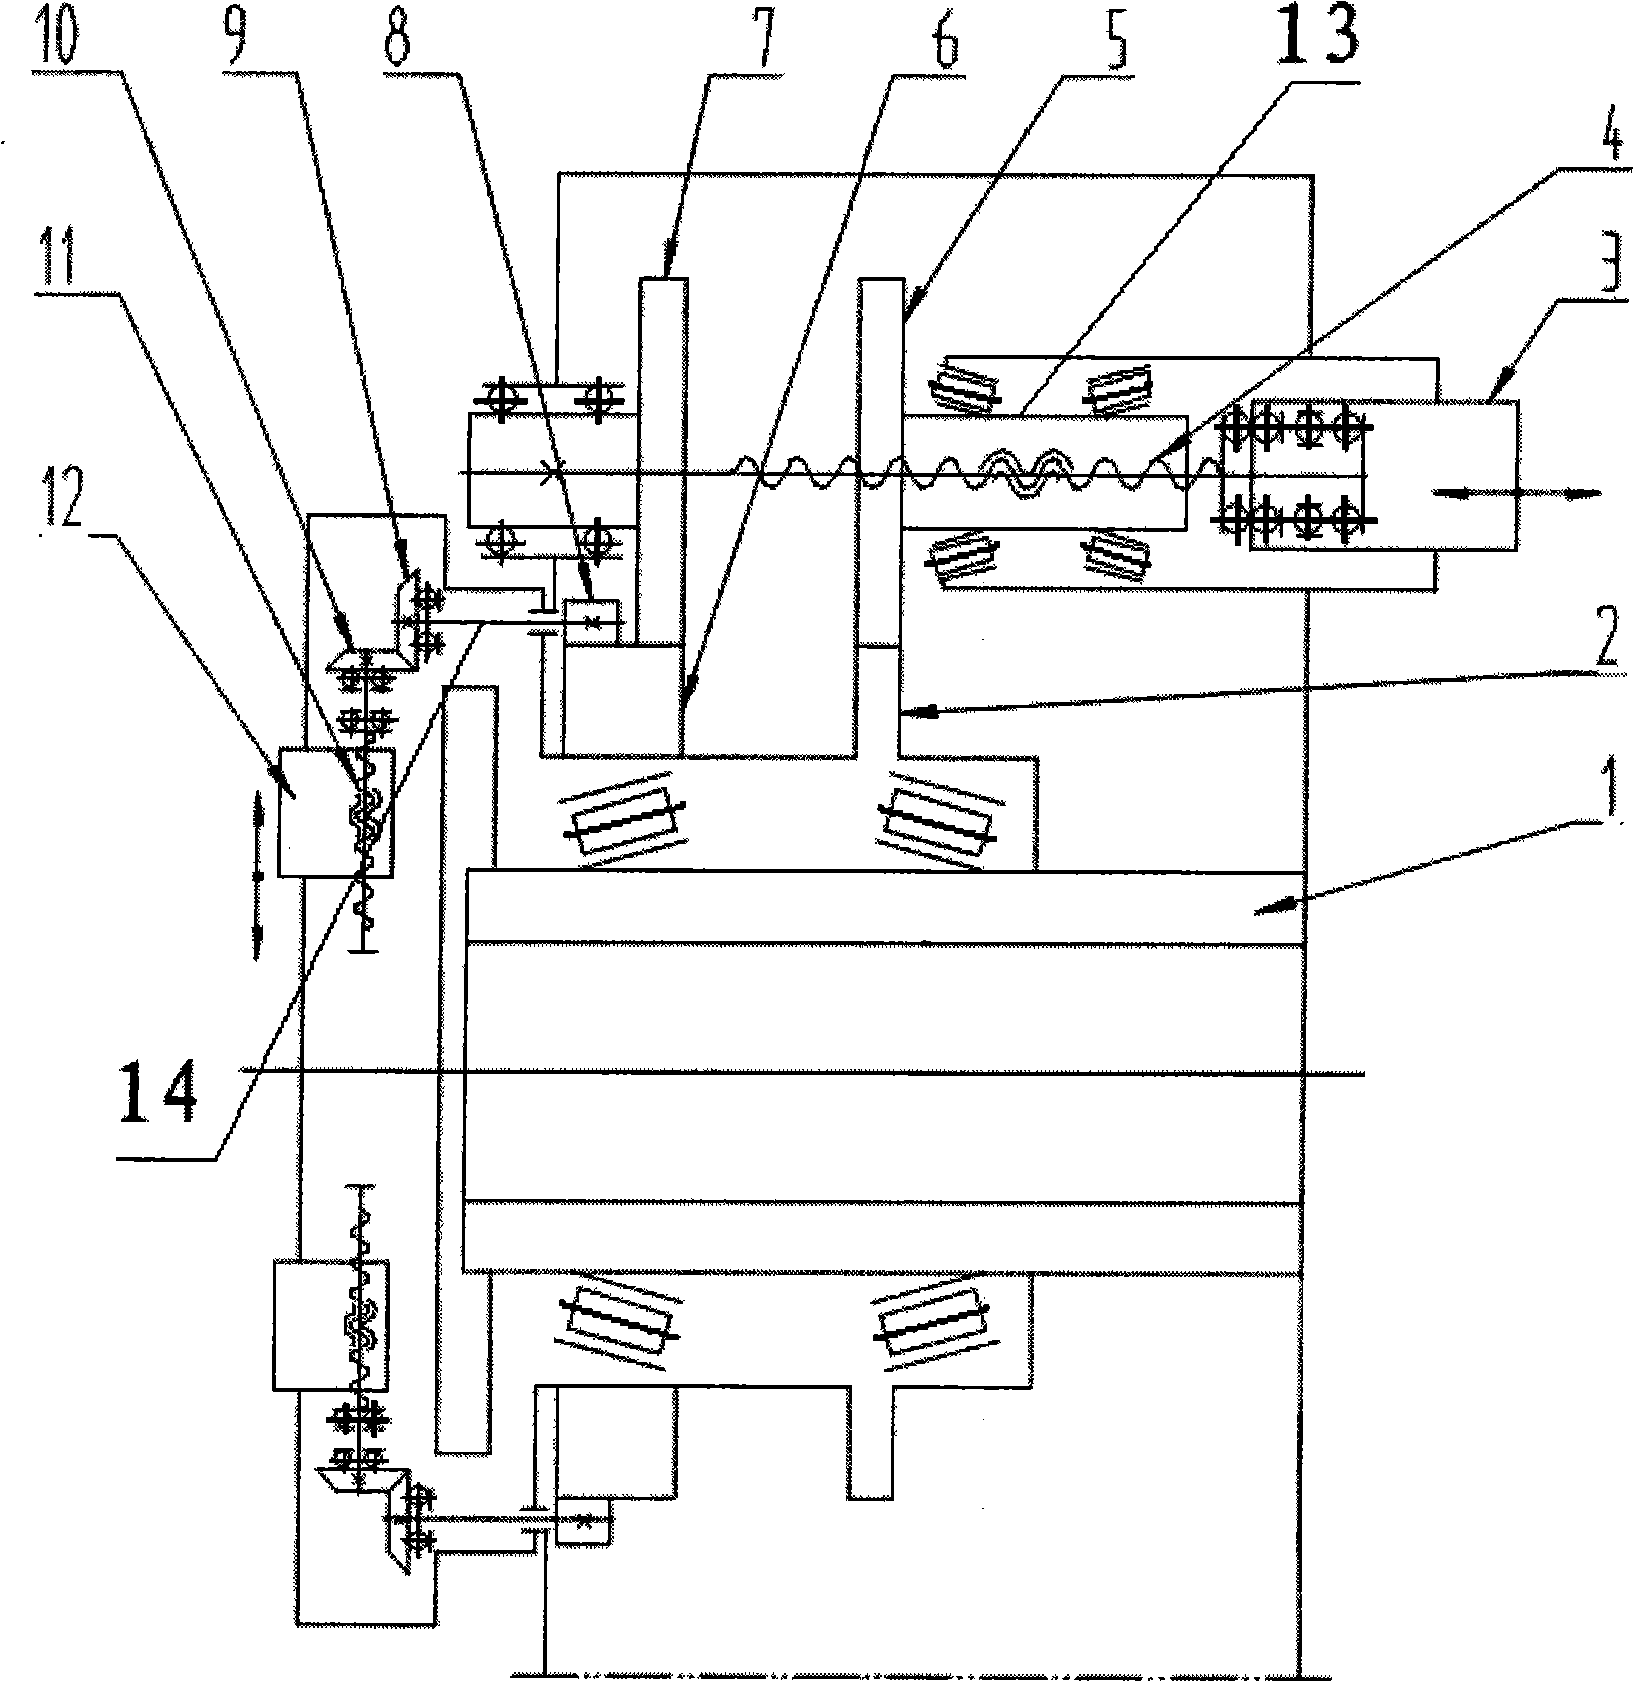 Fluid-pressure driven differential feeding system